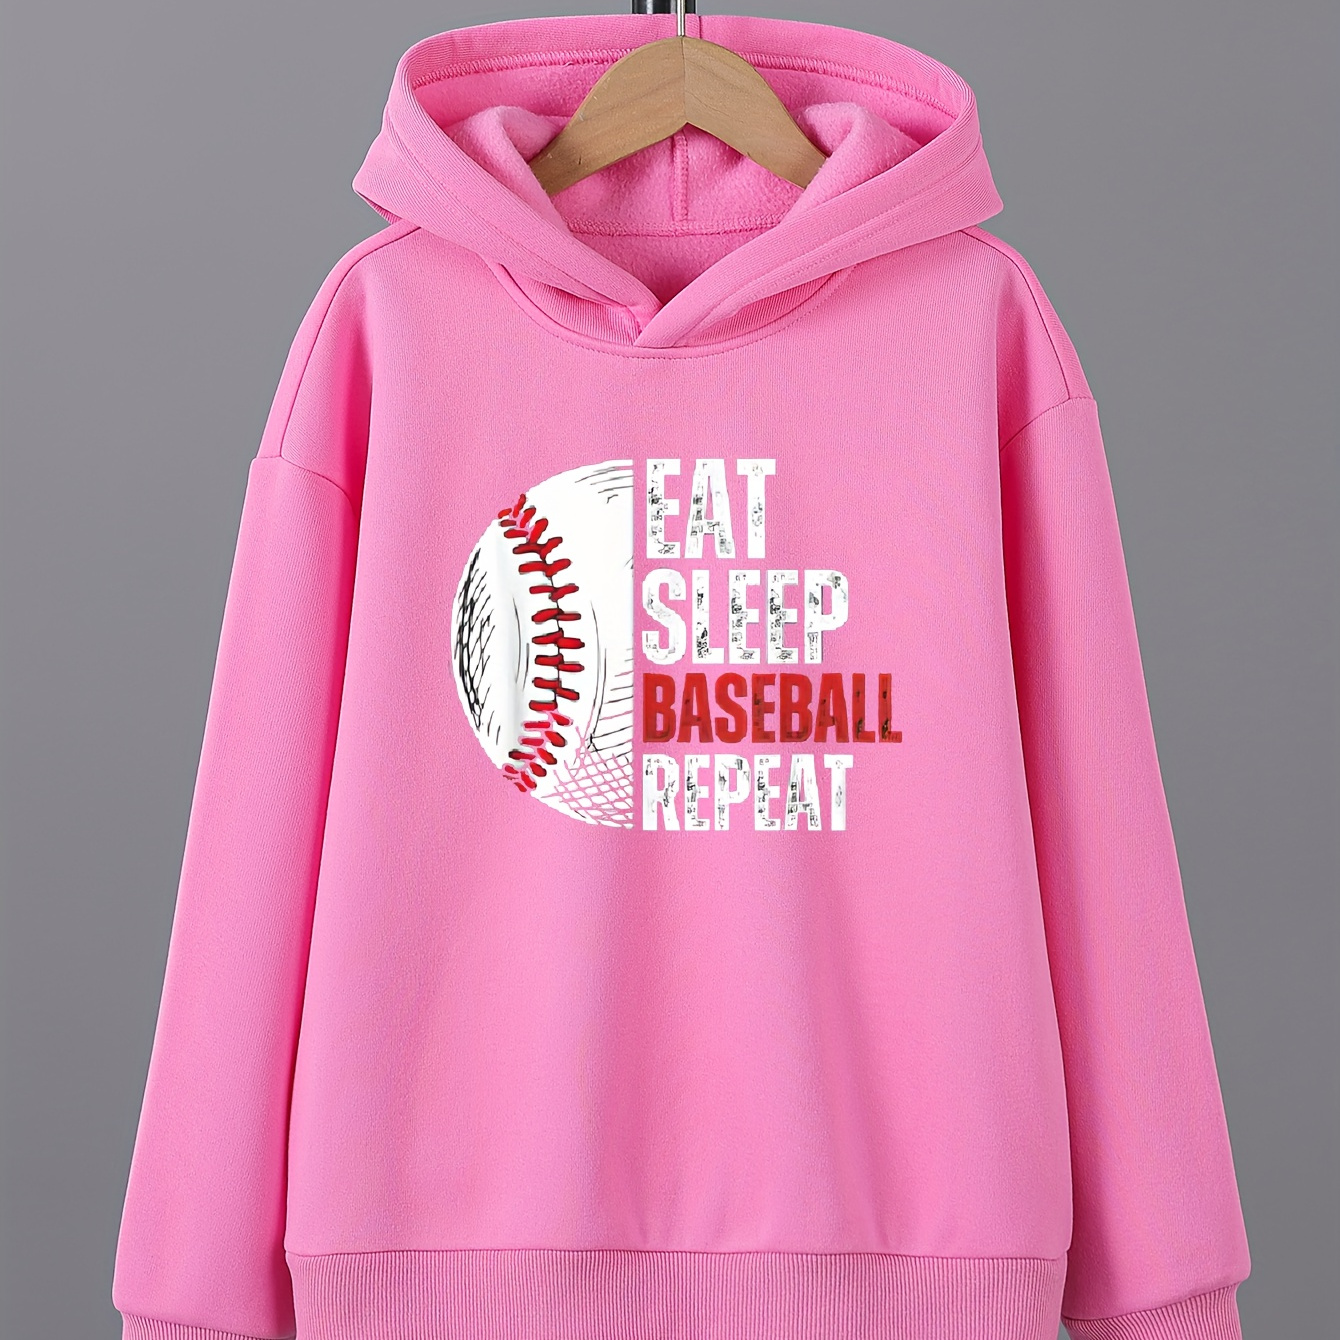 

Eat Sleep Baseball Repeat Letter Print Boys Long Sleeve Hoodie, Stay Stylish And Cozy Sweatshirt - Perfect Spring Fall Winter Essential For Your Little Fashionista!